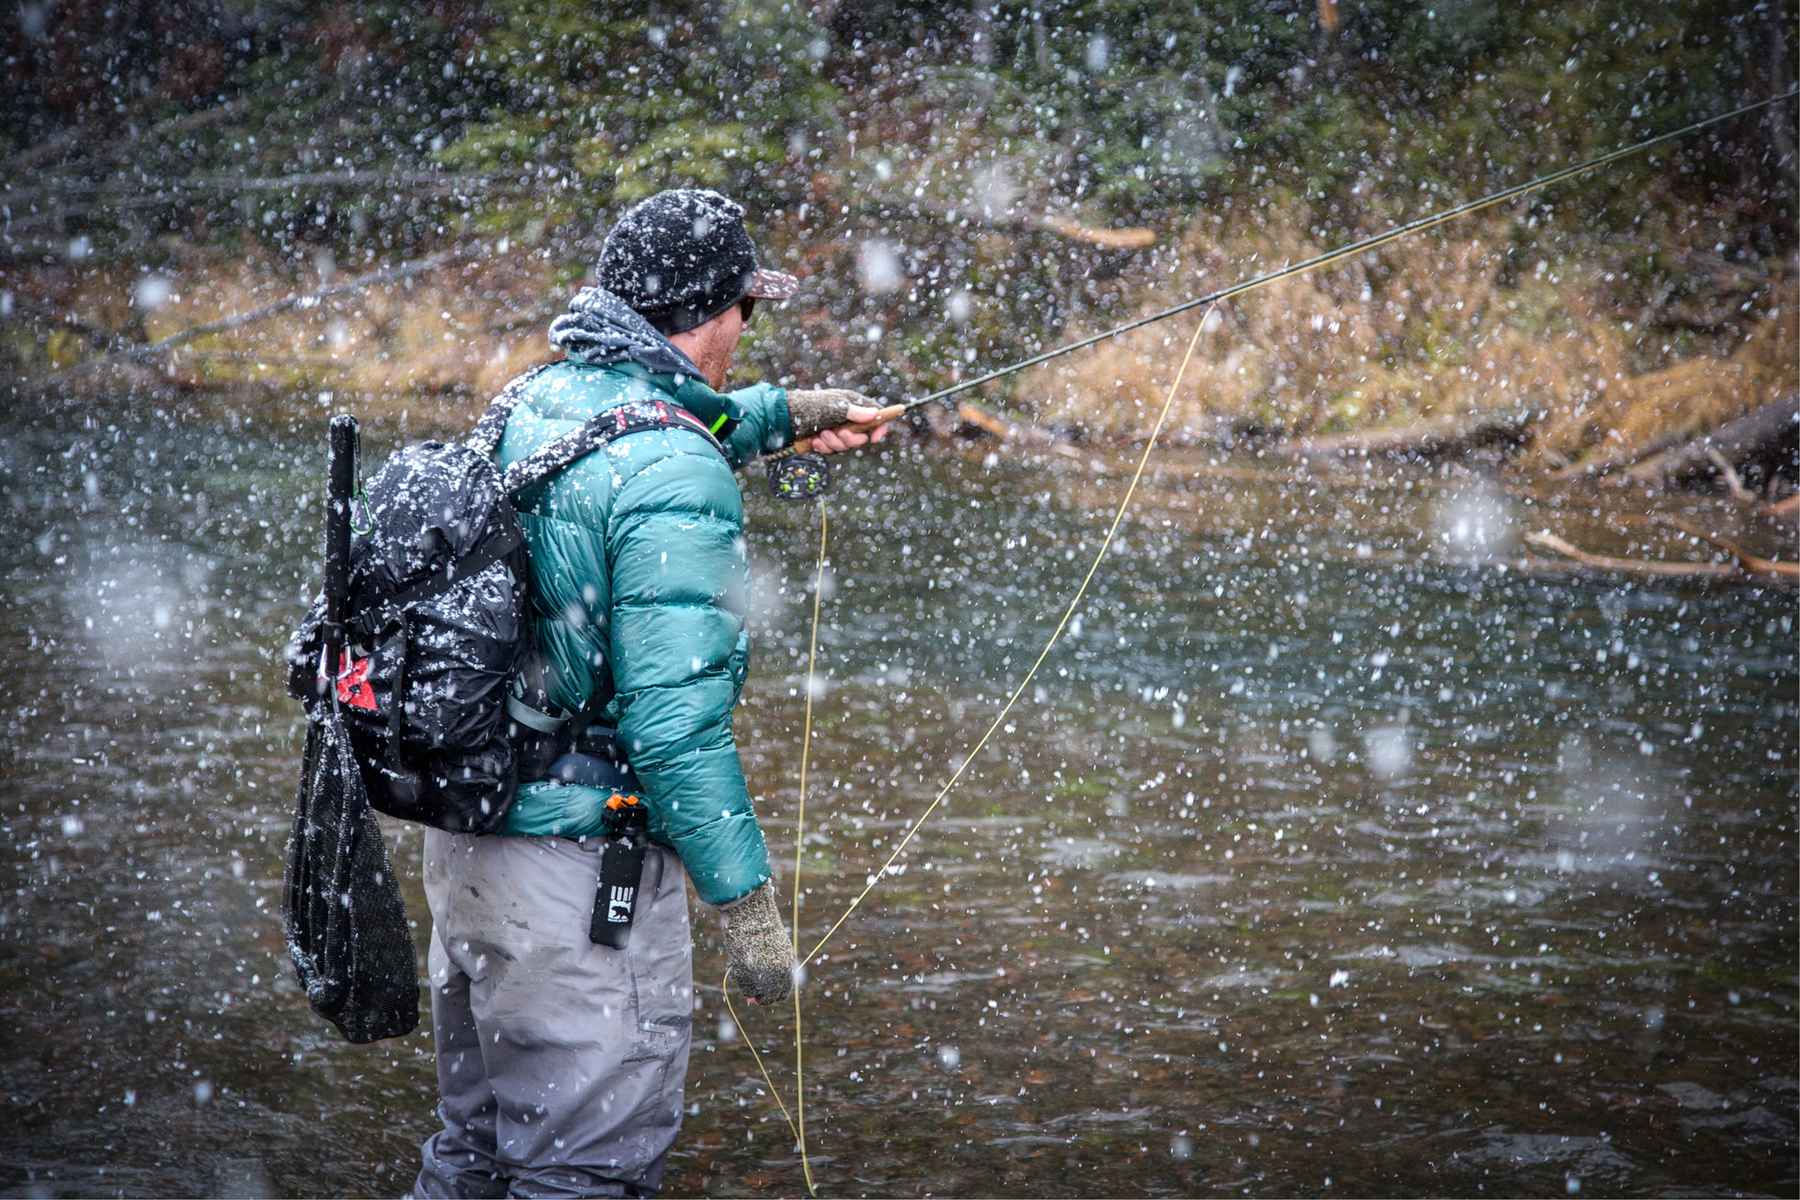 Enjoy seasonal catch and release trout streams this winter